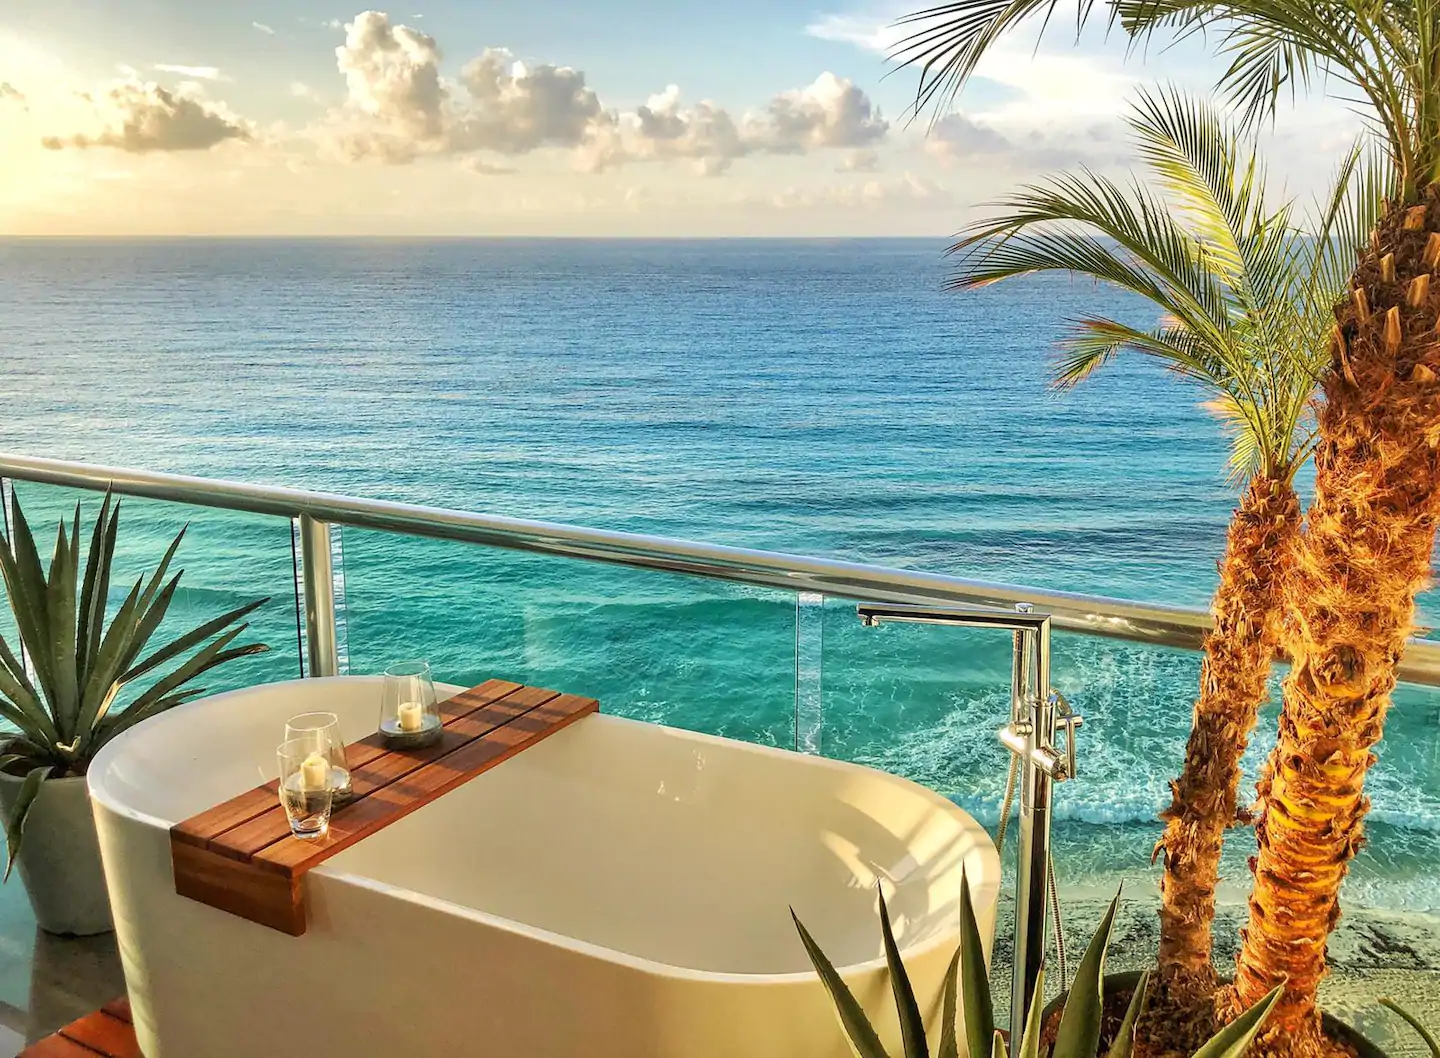 The Quarry is one of the most luxurious Airbnbs in Cancun!